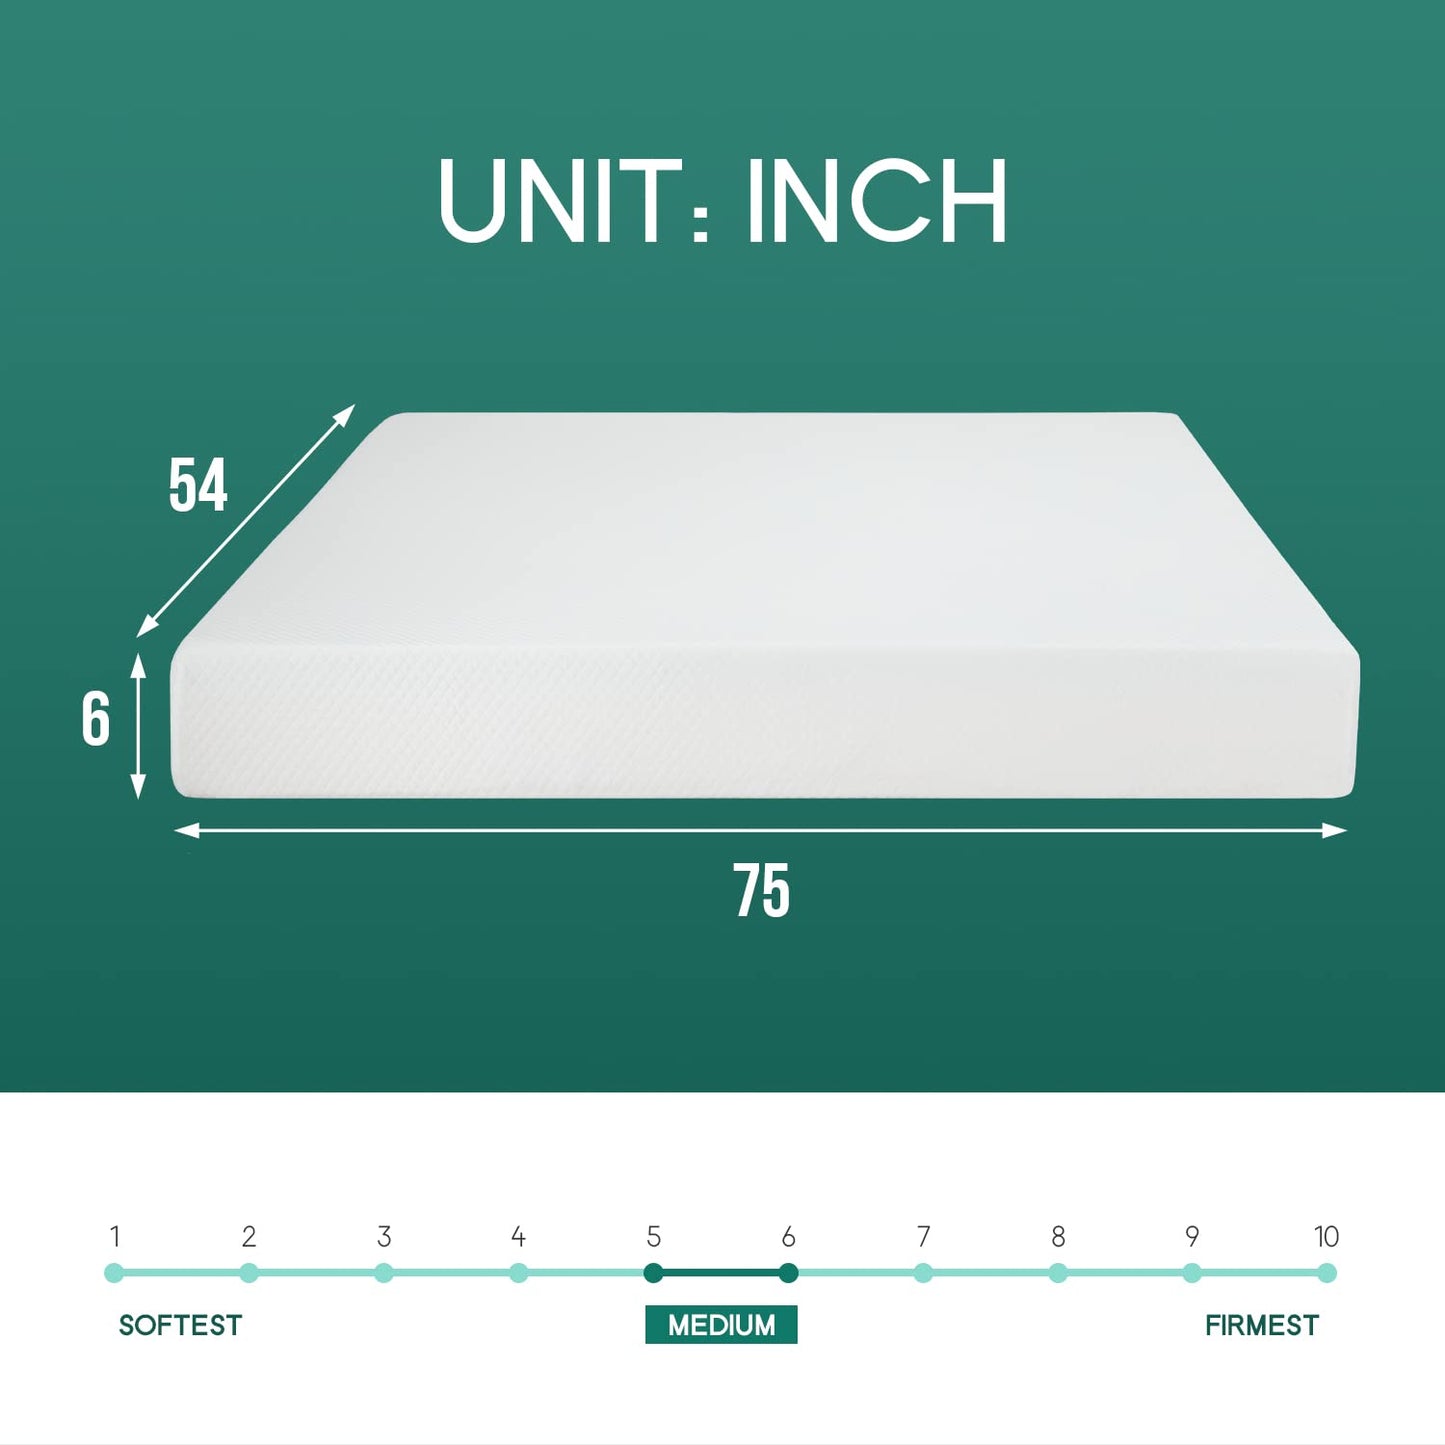 PayLessHere 6 Inch Full Gel Memory Foam Mattress Fiberglass Free/CertiPUR-US Certified/Bed-in-a-Box/Cool Sleep & Comfy Support